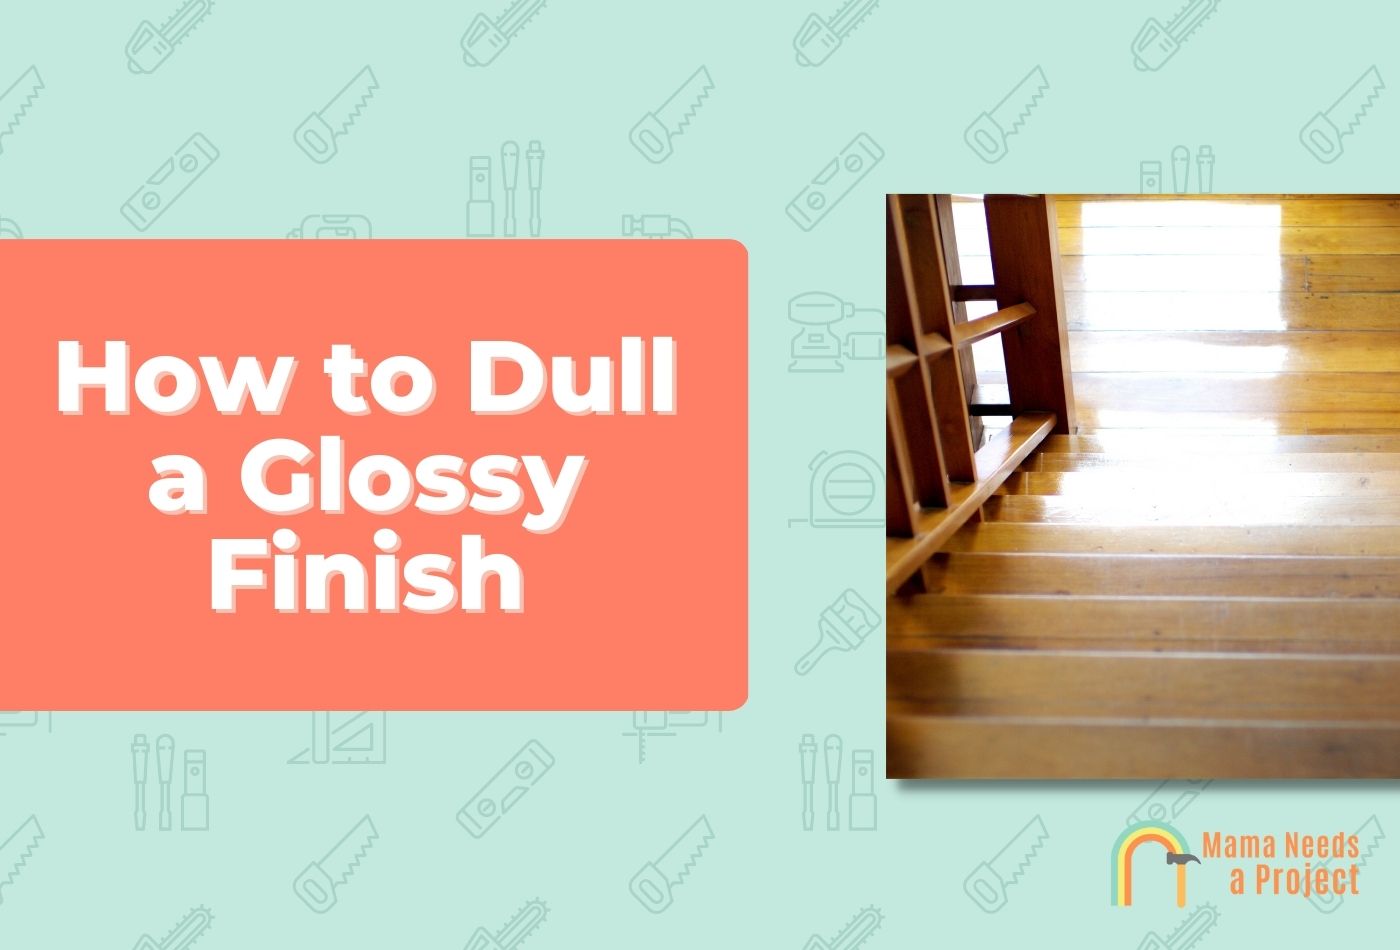 How to Dull a Glossy Finish